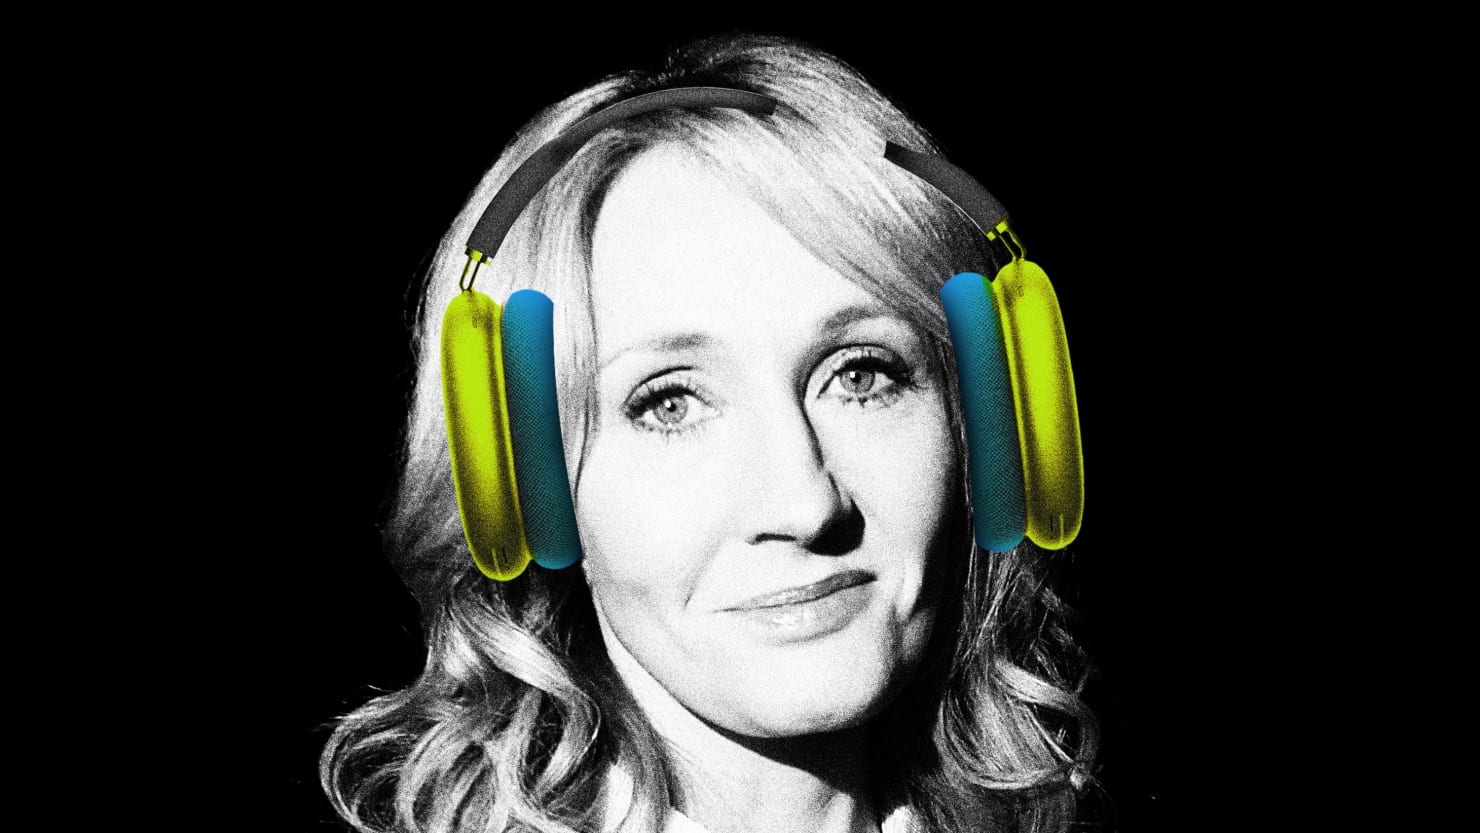 Why is everyone still listening to JK Rowling?